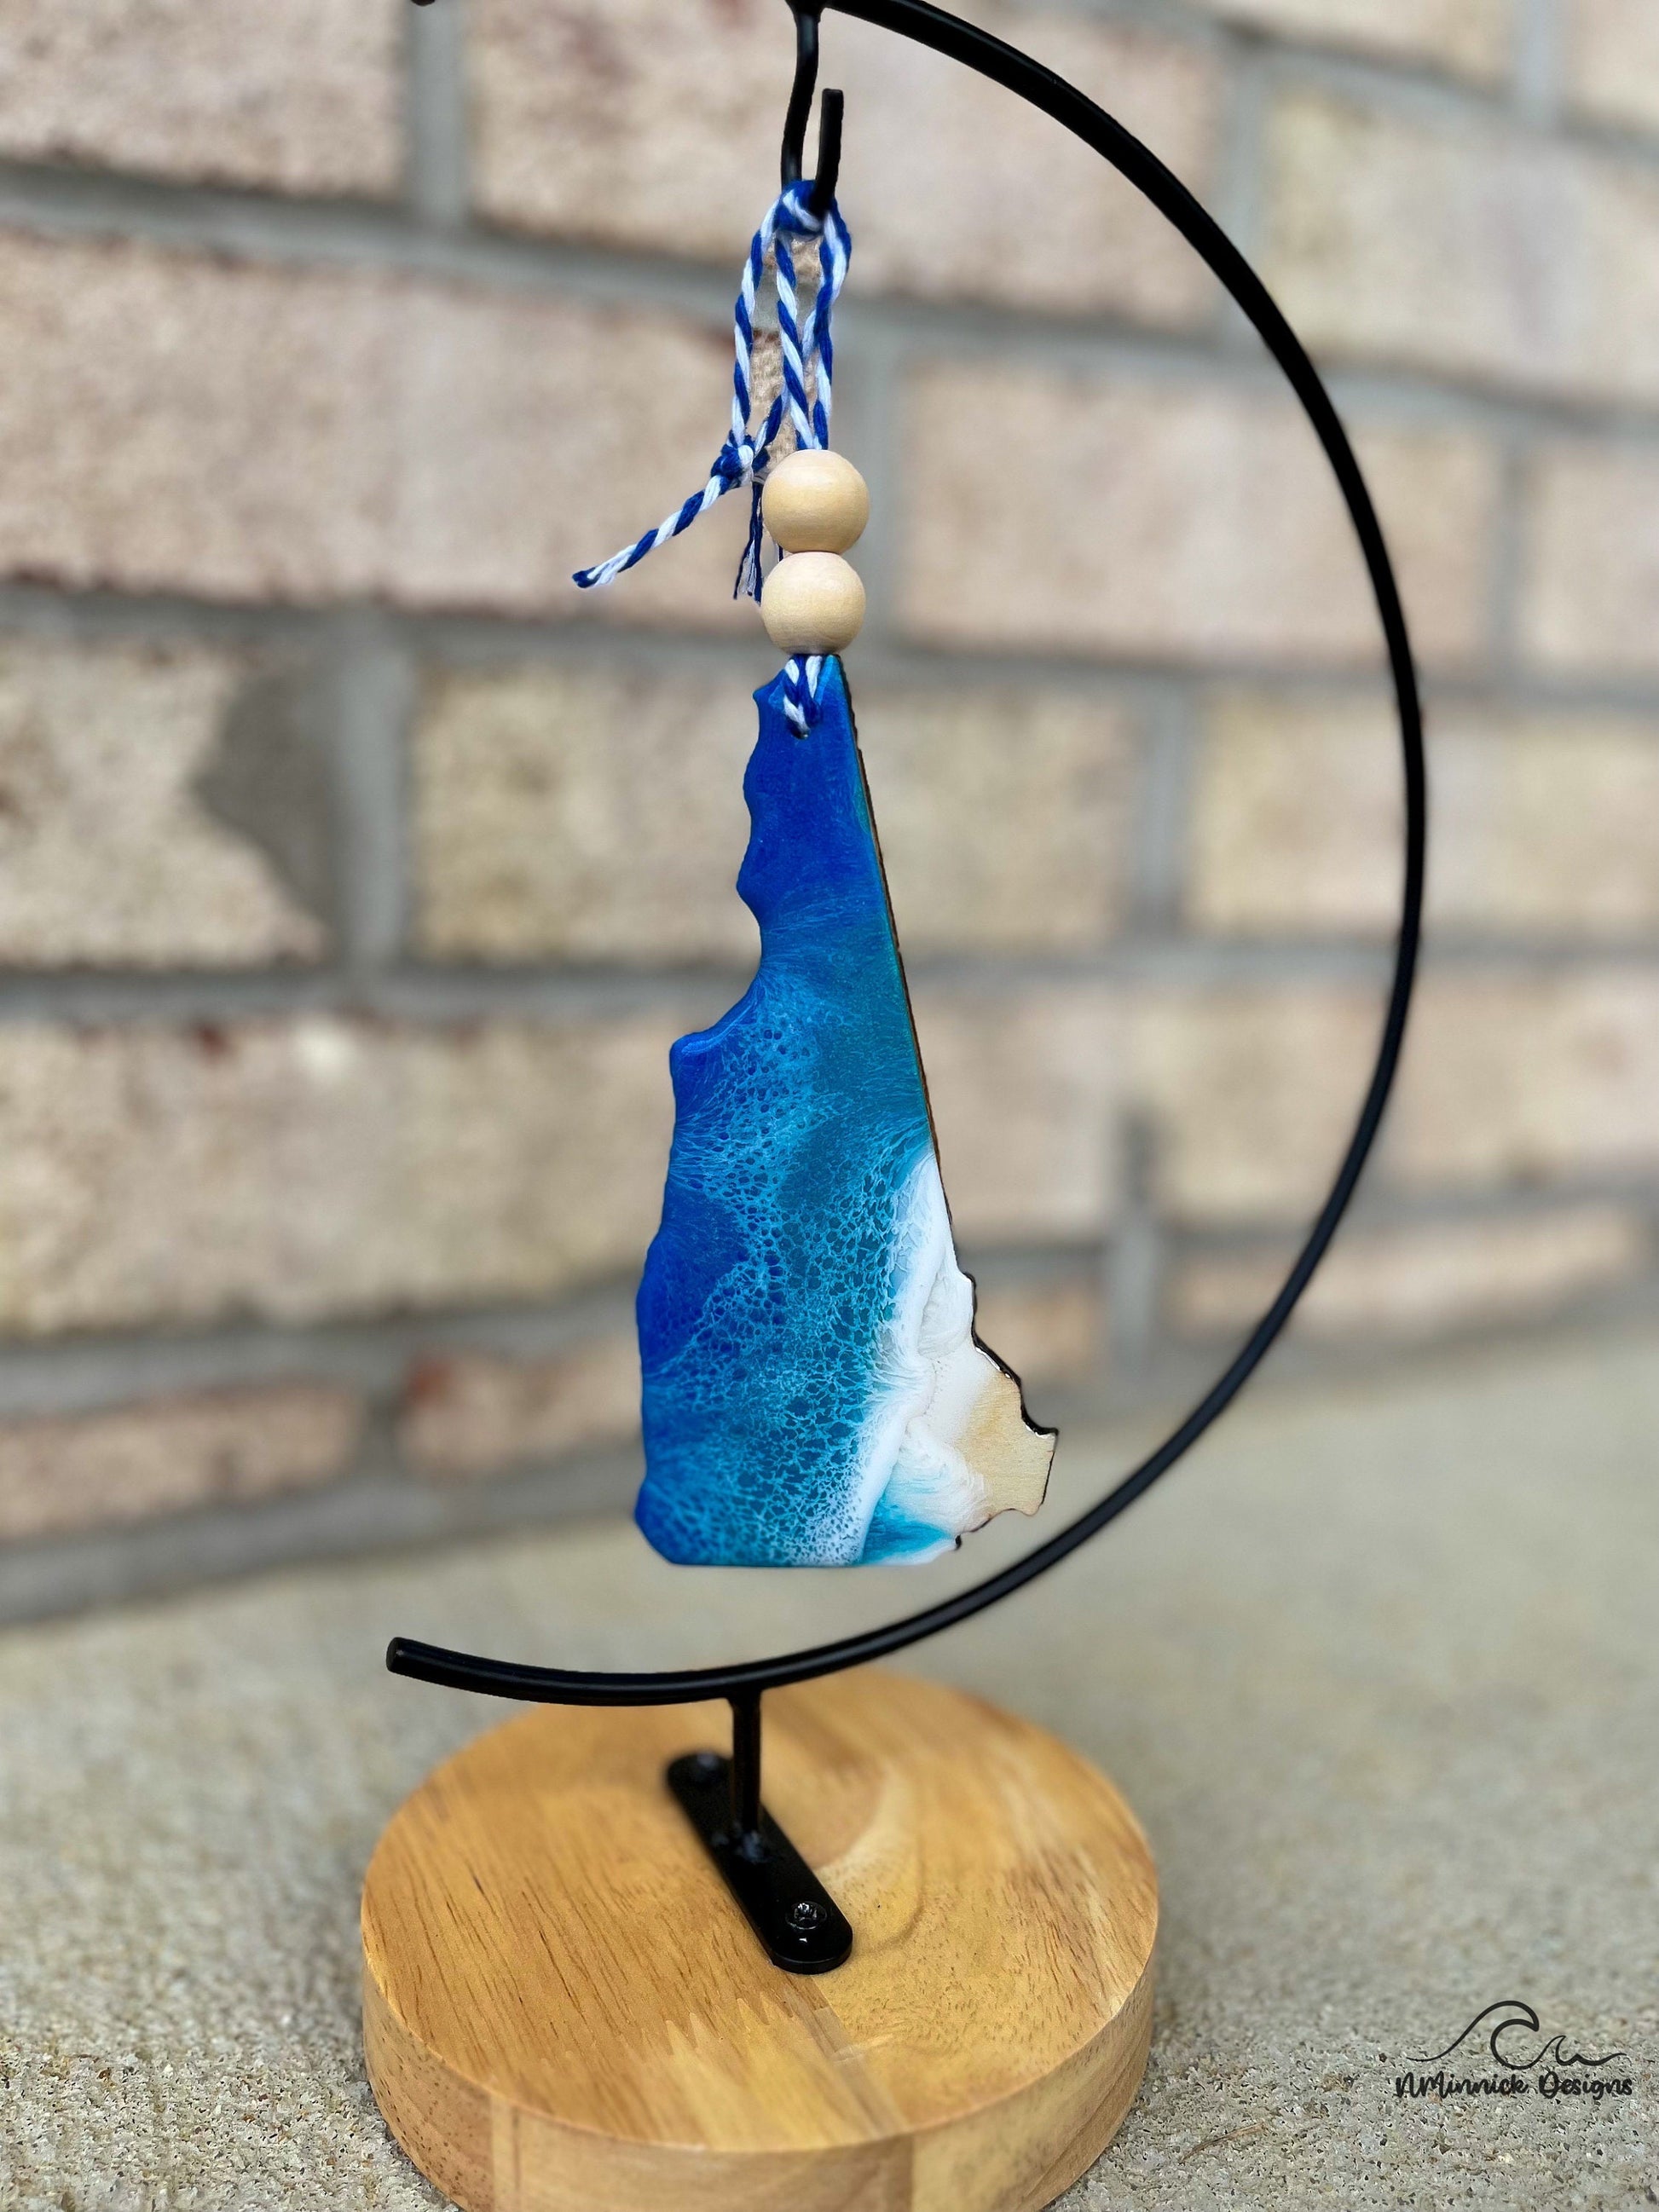 New Hampshire wood and resin ornament made to look like ocean waves. Hanging from an ornament stand.